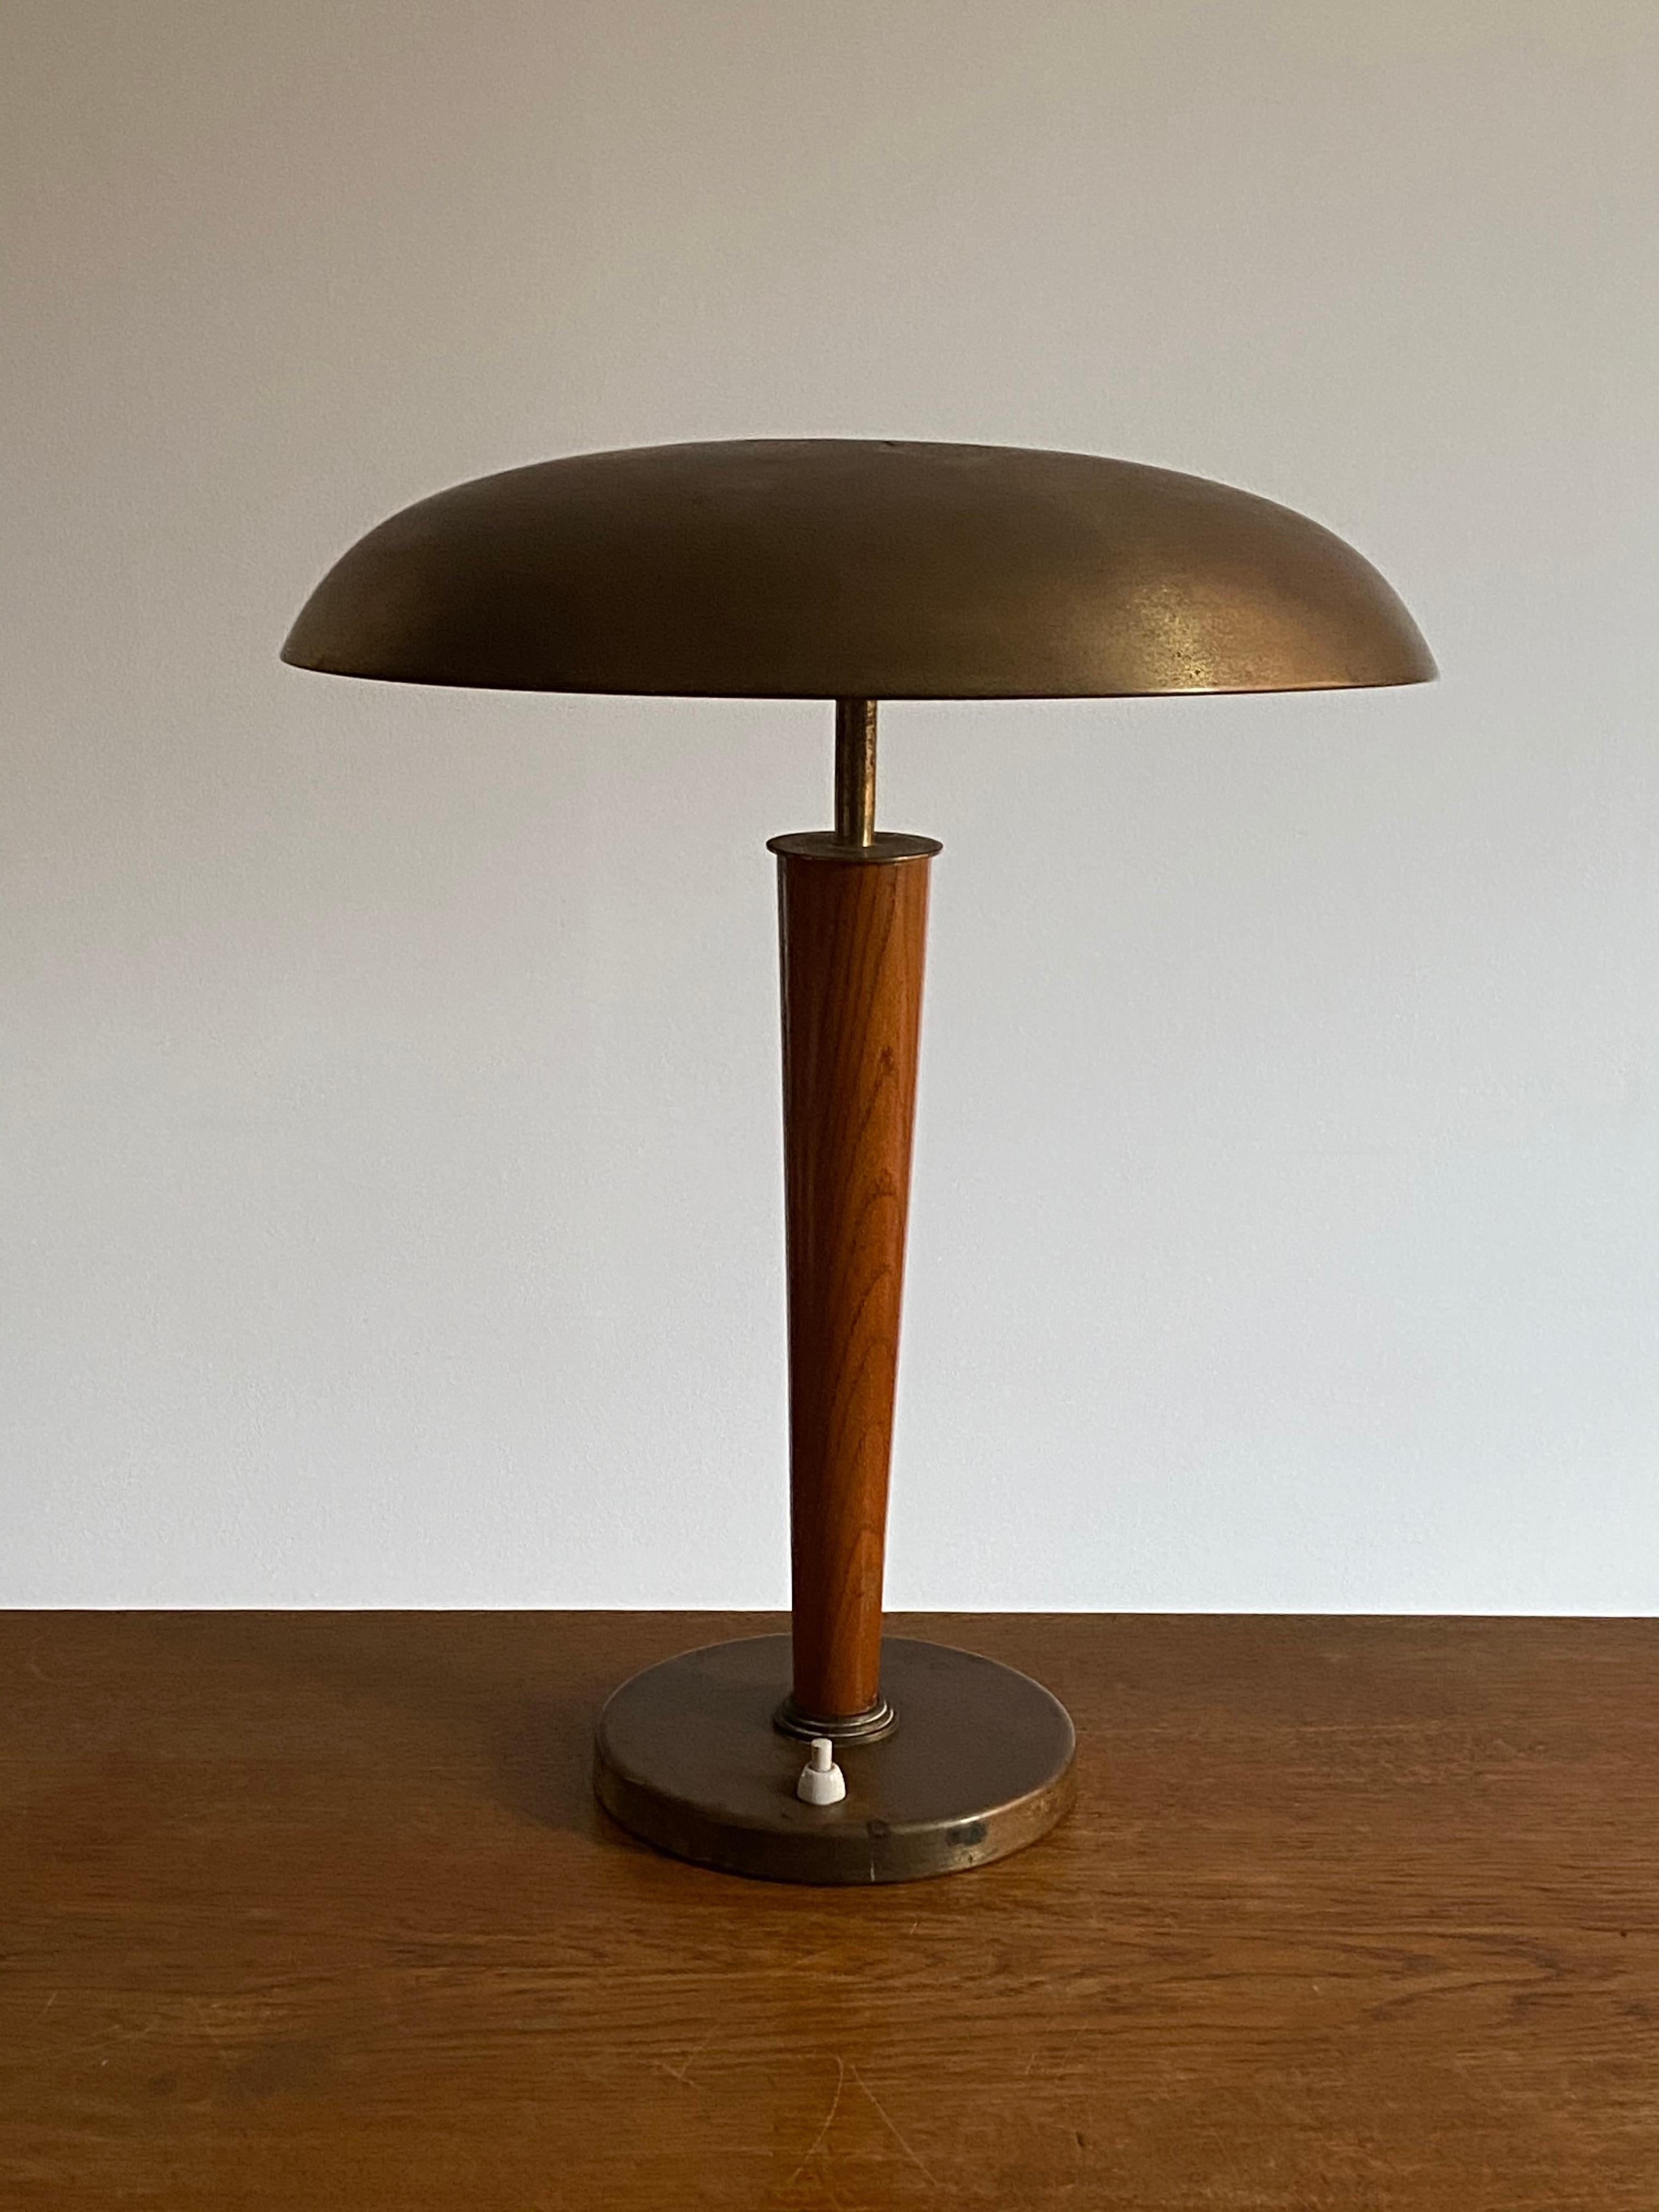 A rare desk light / table lamp. Produced by Boréns, Borås, Sweden, 1940s.

In brass and stained oak.

Other designers of the period working in similar style include Paavo Tynell, Hans Bergström, Josef Frank, and Stilnovo.